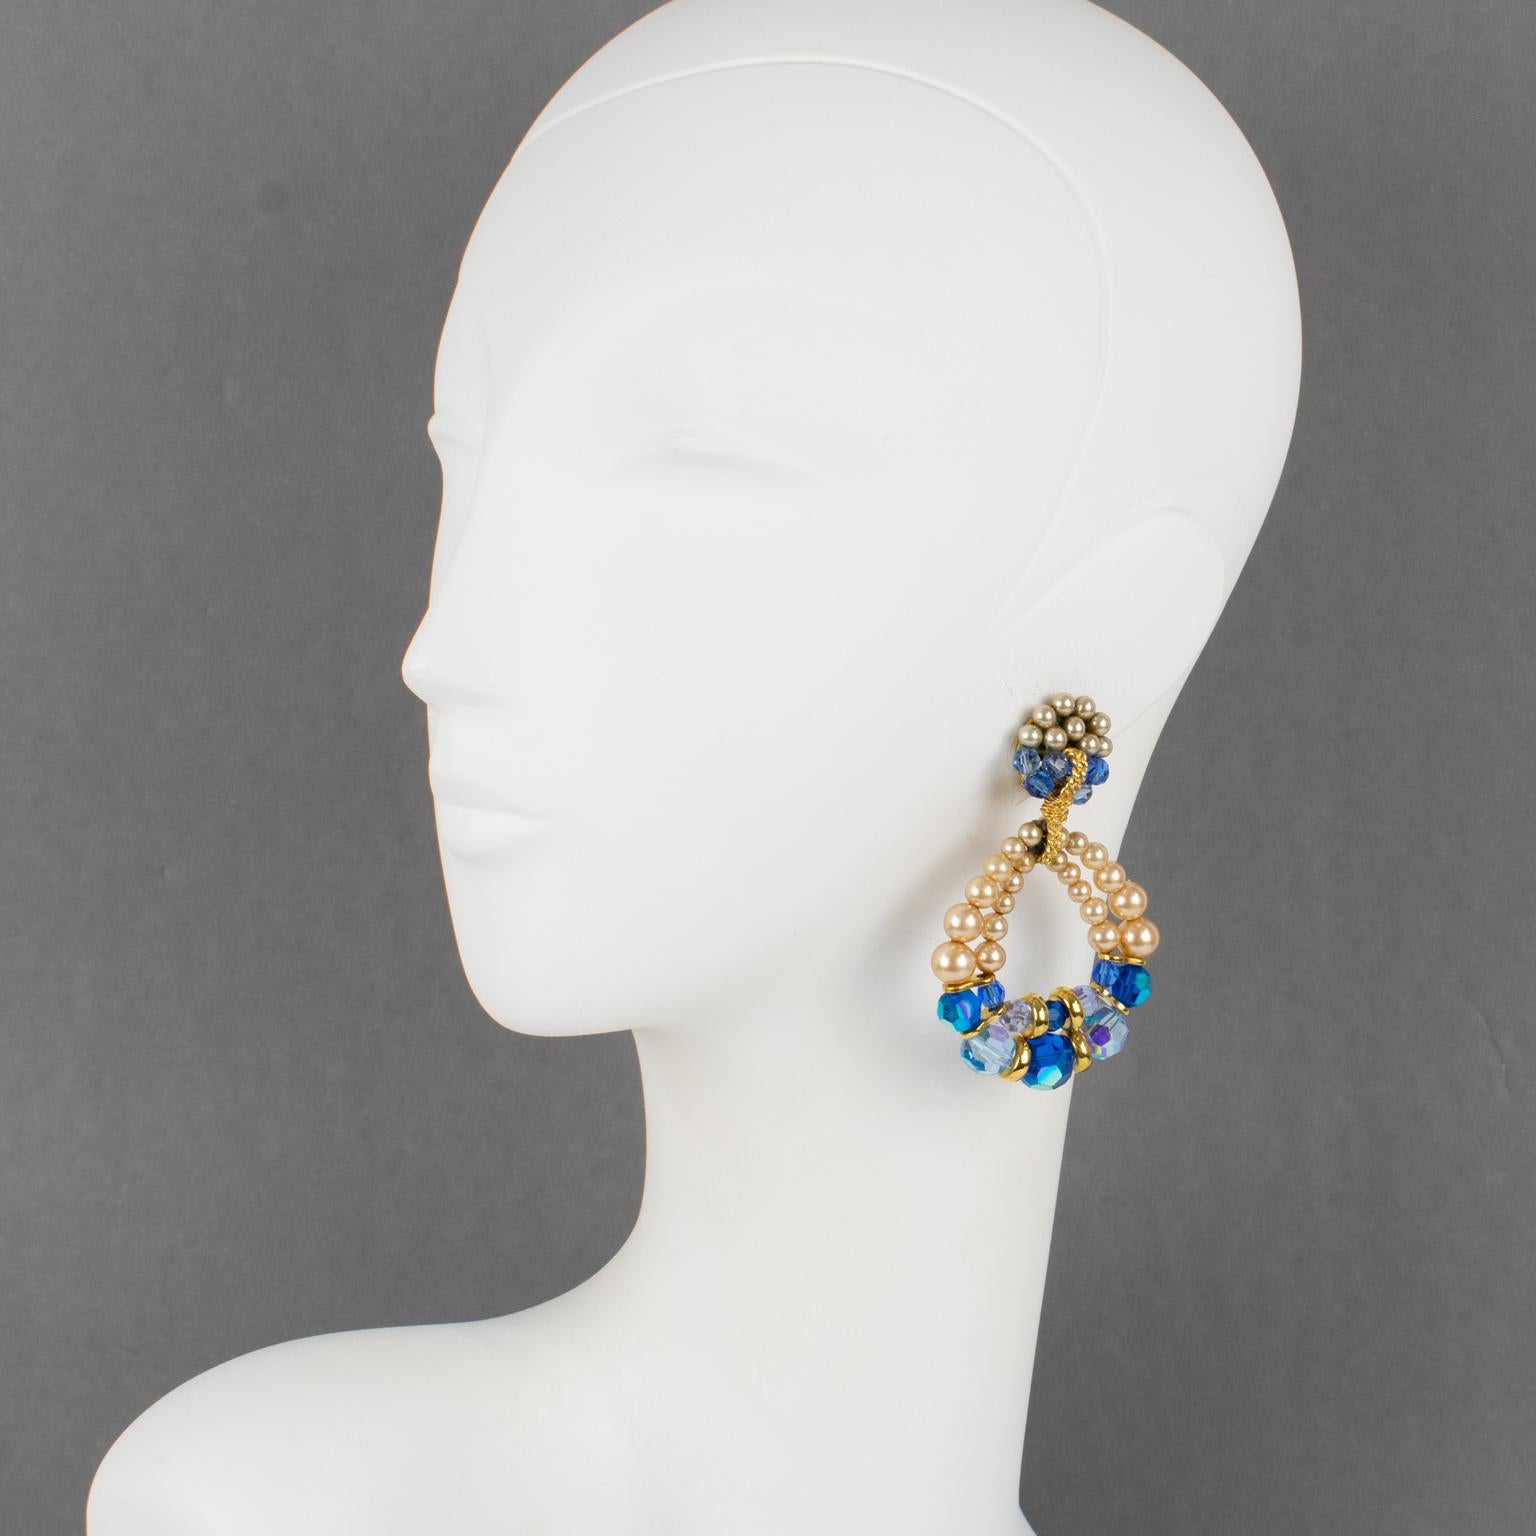 Francoise Montague Paris designed these exquisite dangling clip-on earrings. The iconic Lolita shape style has a handmade double hoop design ornate with cobalt blue and baby blue crystal faceted beads and pearl-imitation beads. The pieces will come